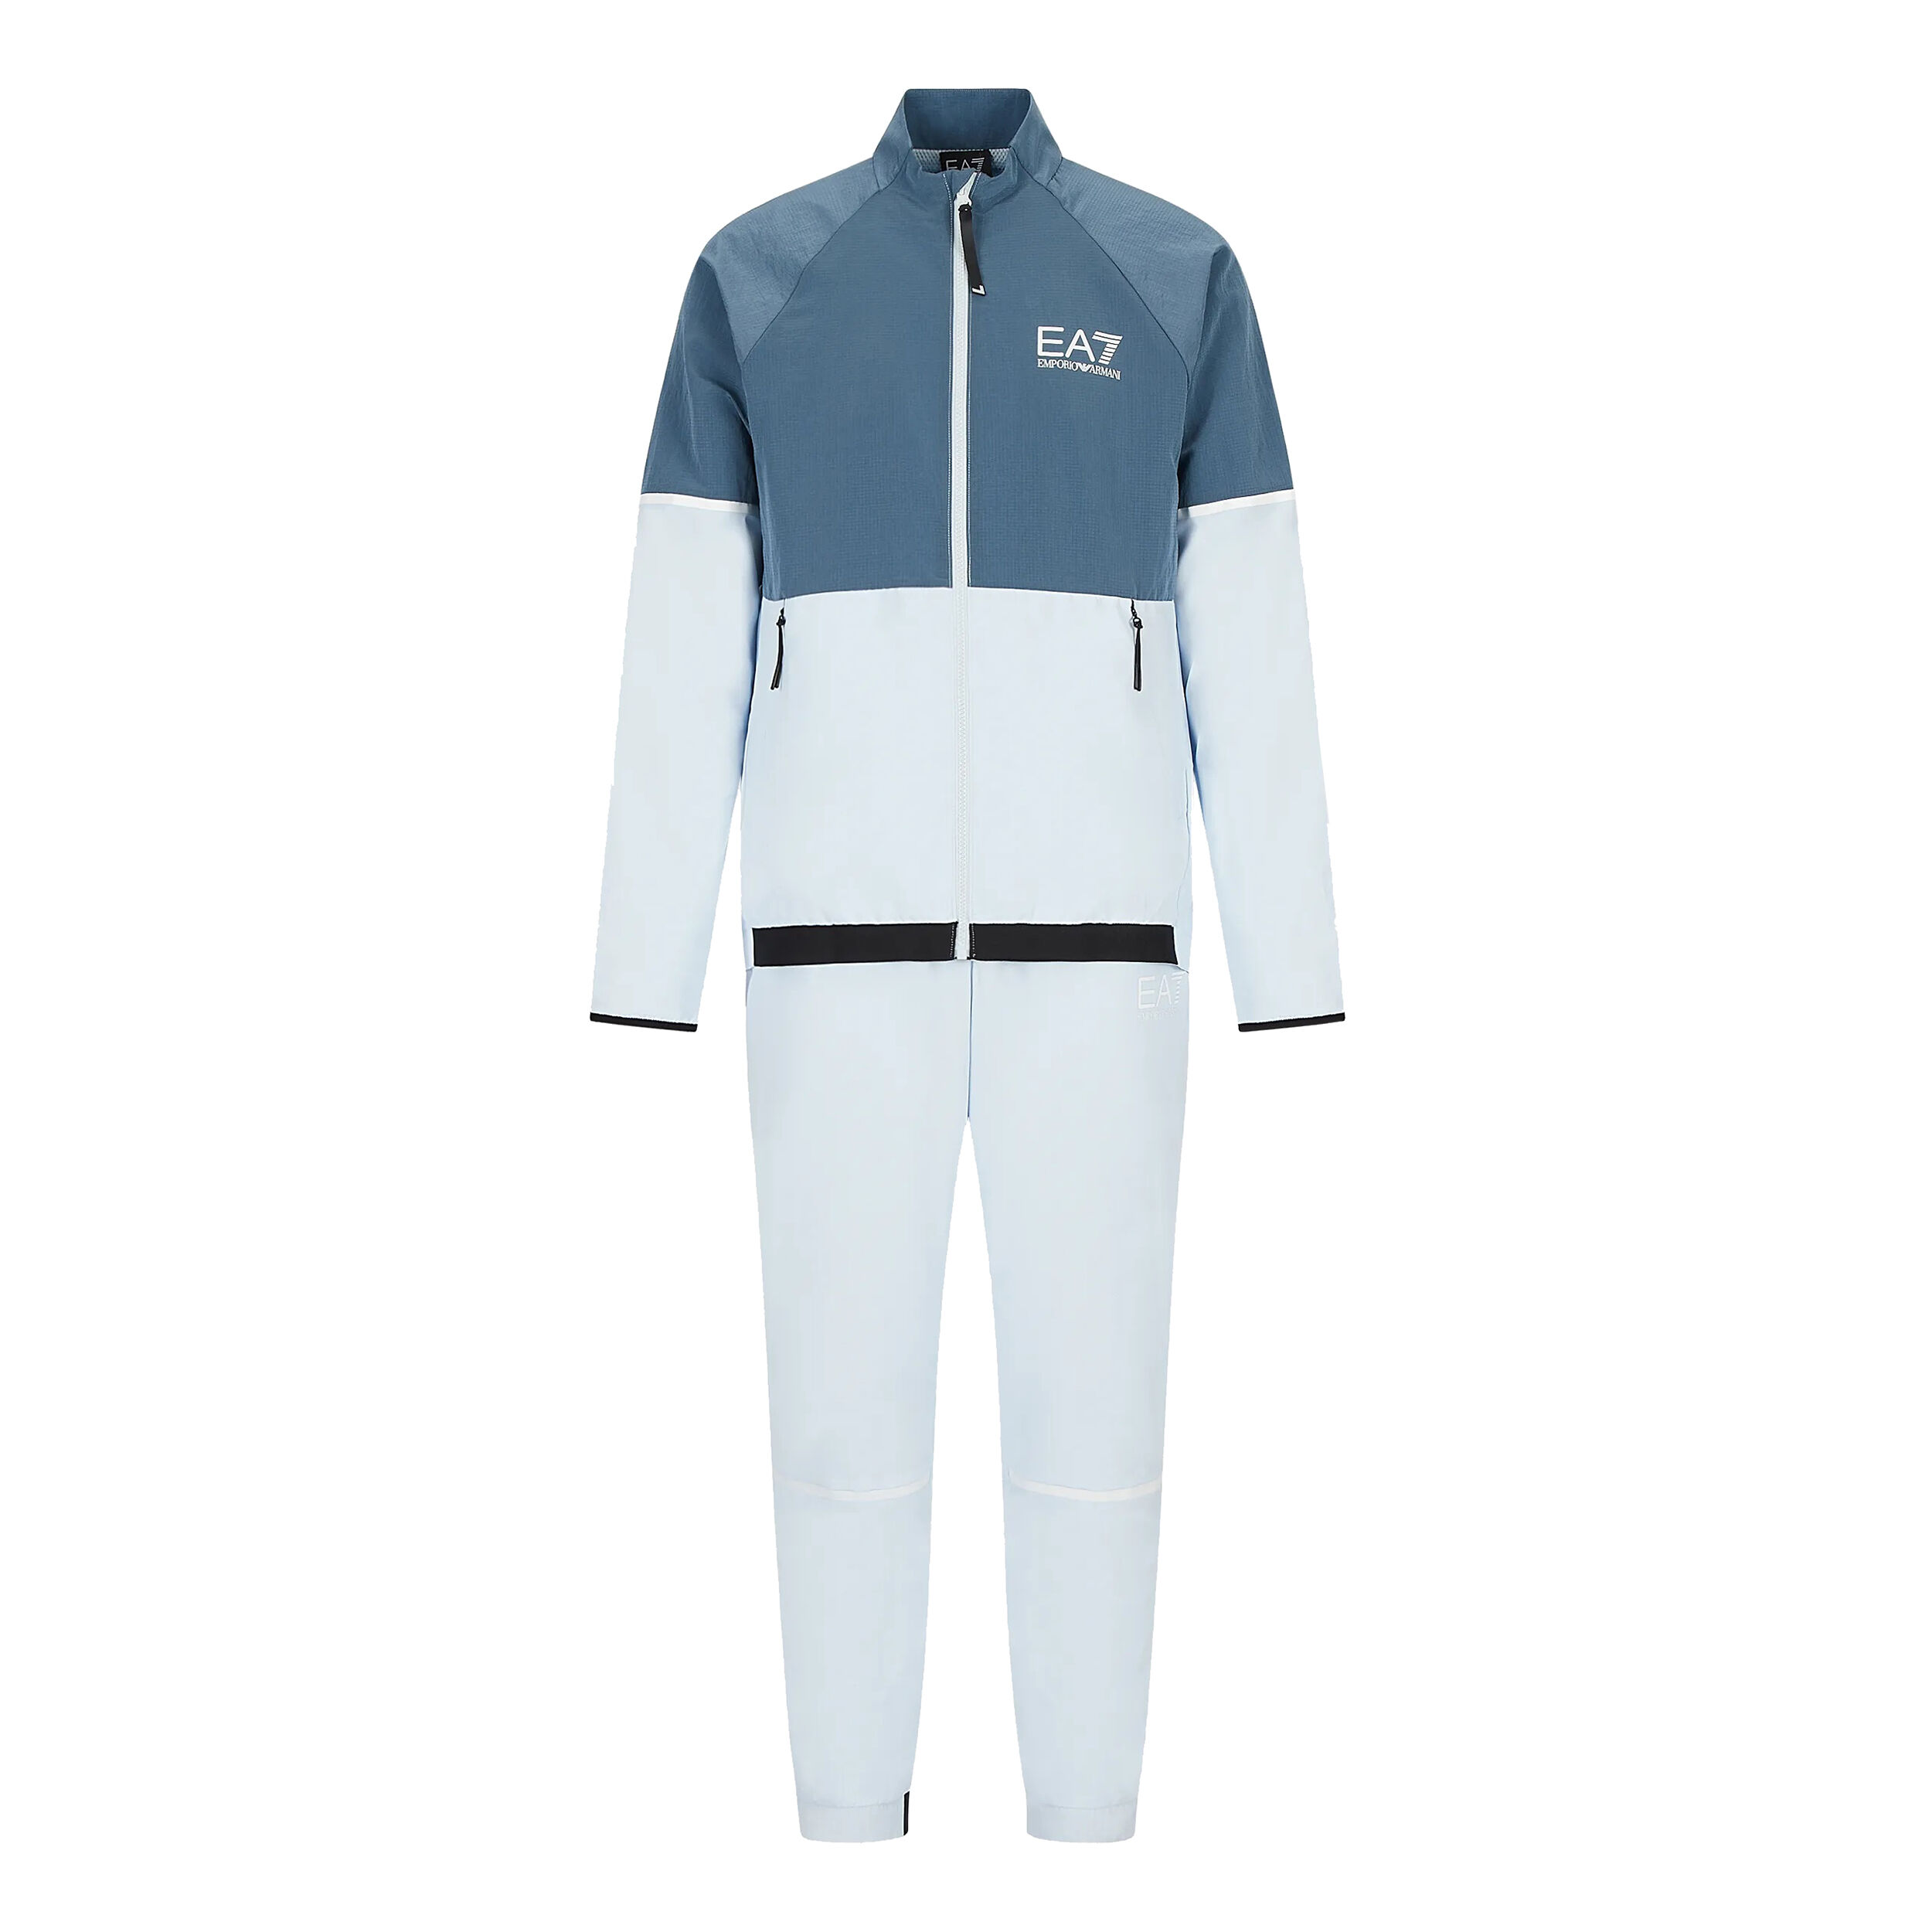 Buy Tennis clothing from EA7 online | Tennis-Point